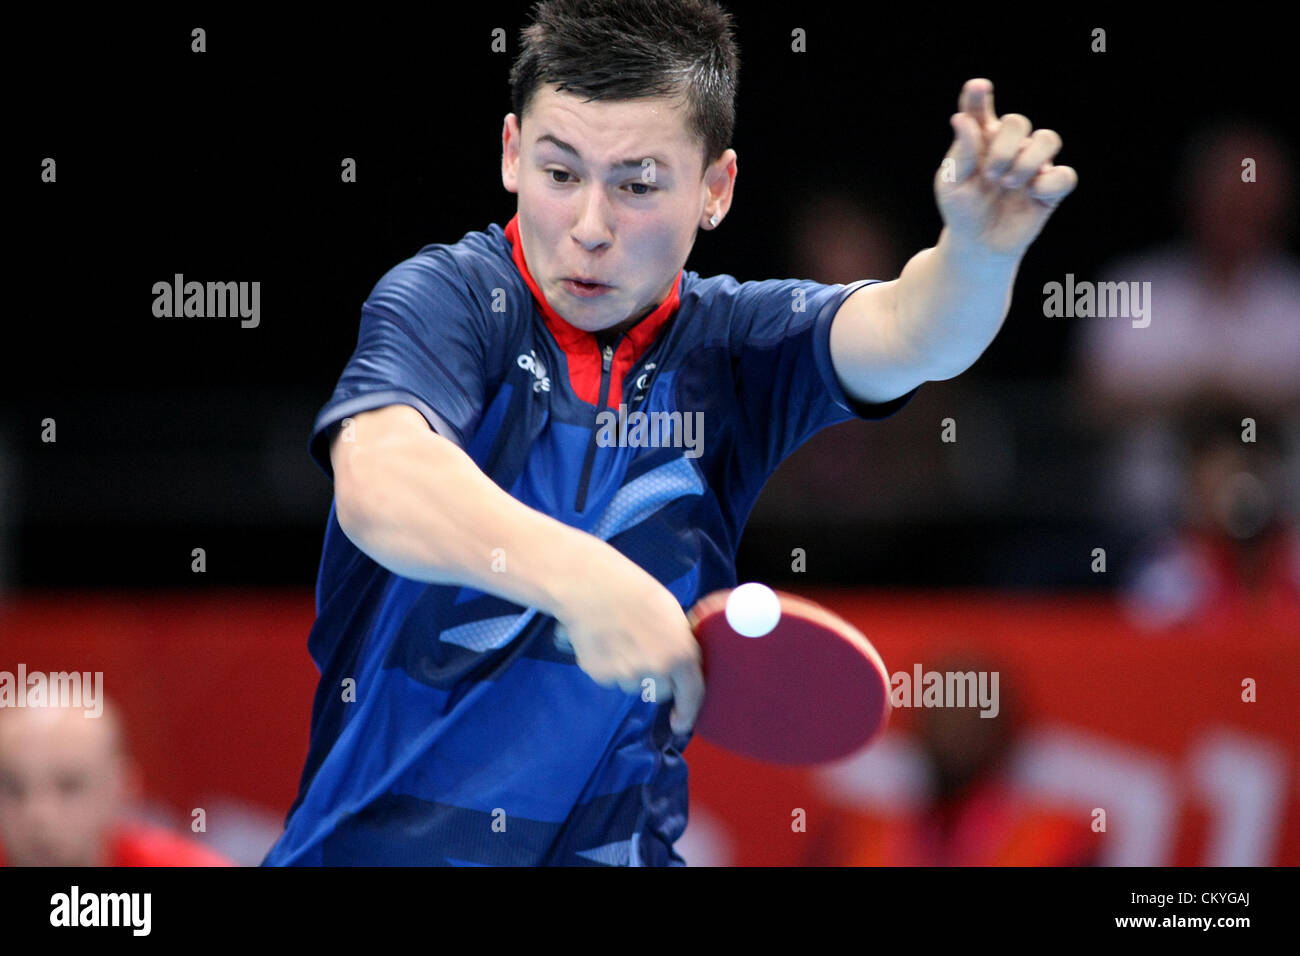 03.09.2012. London, England. Ross Wilson (GBR) in action during the Men's Singles - Class 8 Table Tennis during Day 3 of the London Paralympics from the Excel Arena Stock Photo